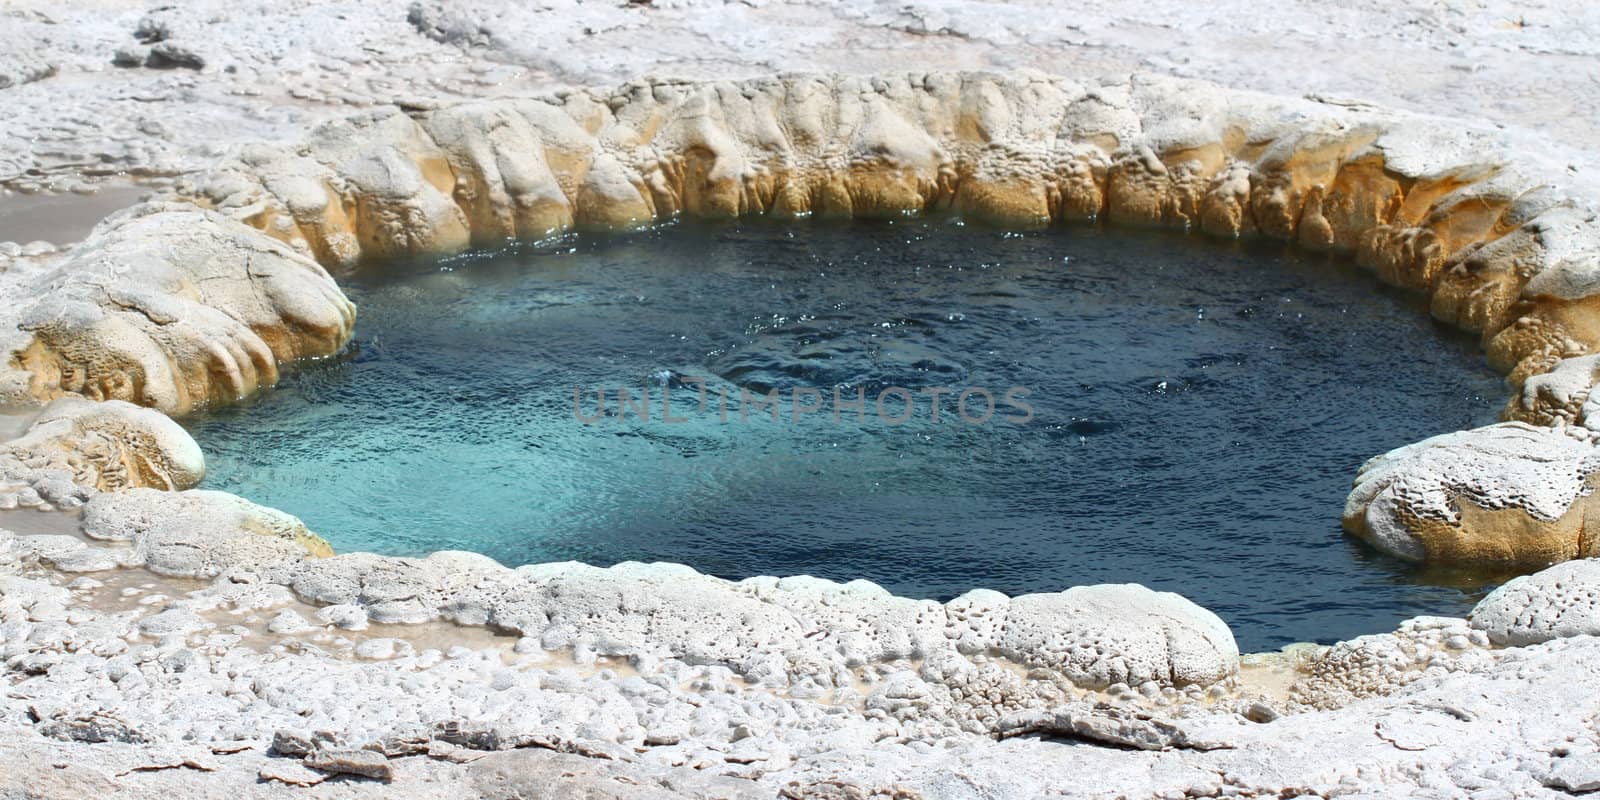 Hot water churns in Beach Spring at the Upper Geyser Basin of Yellowstone National Park.